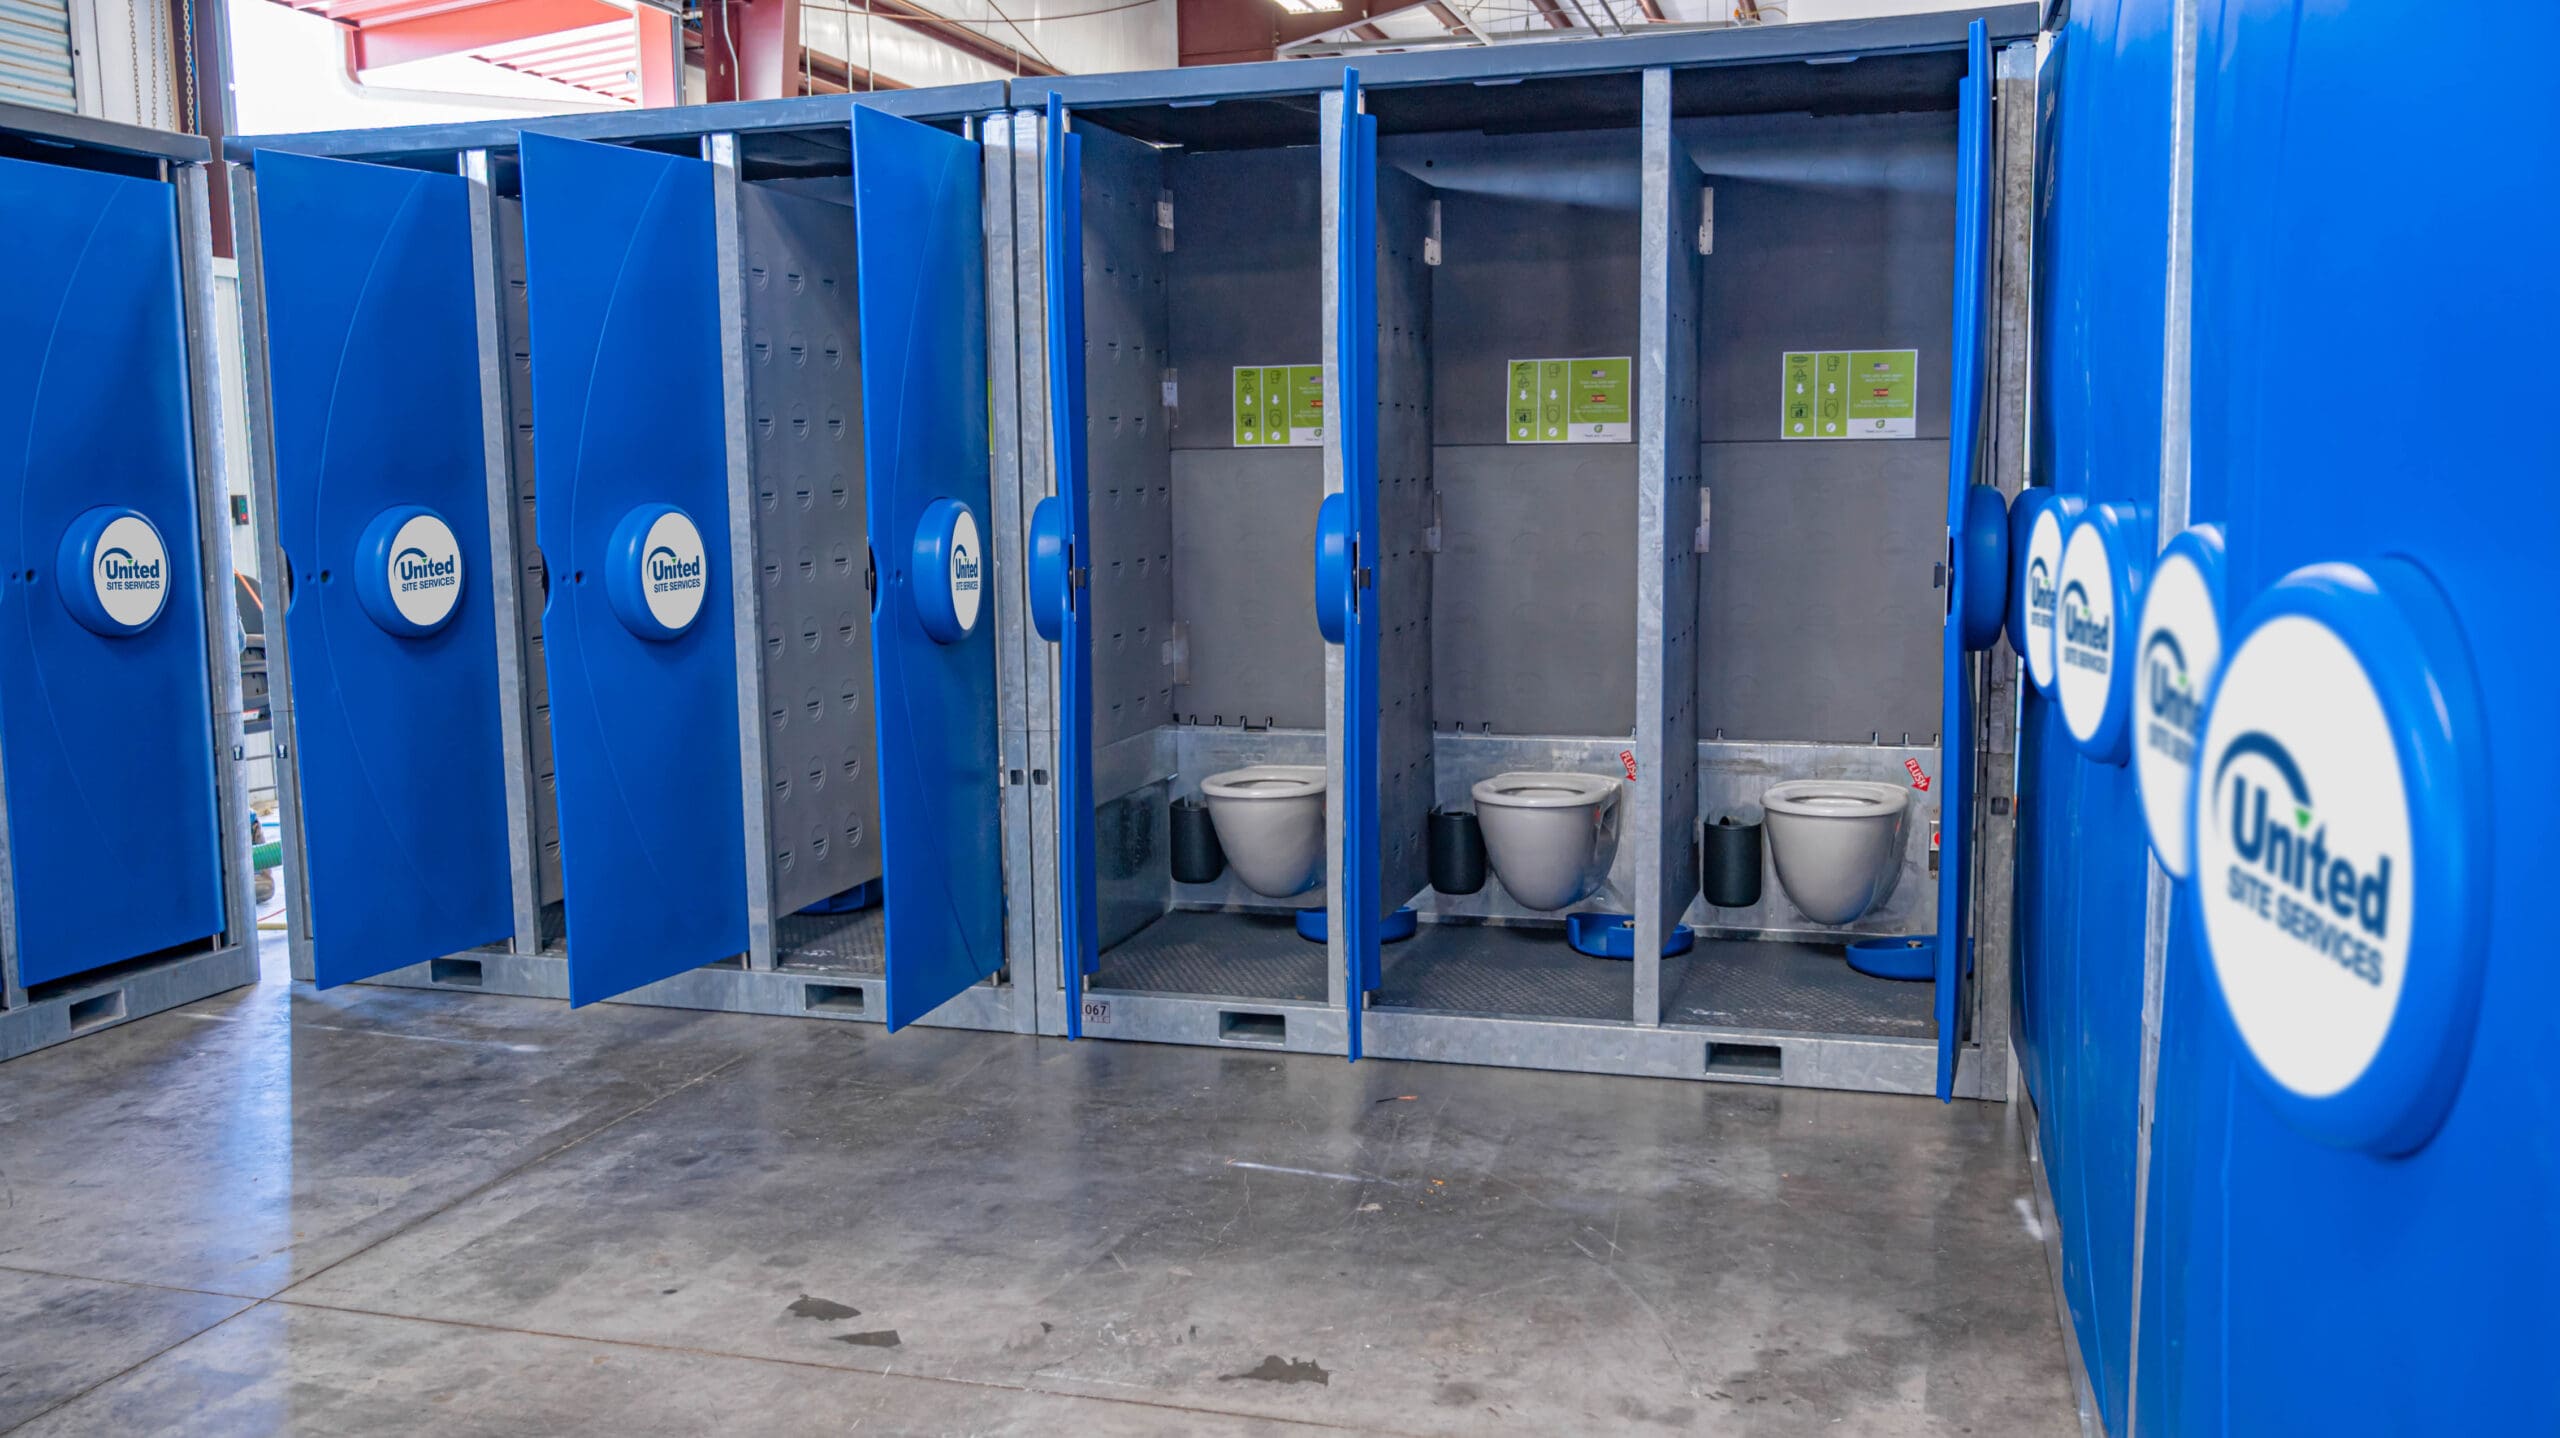 A row of open blue portable toilets, part of the USS Hydroflow System, in a large industrial space, each featuring a white toilet and hand sanitizer